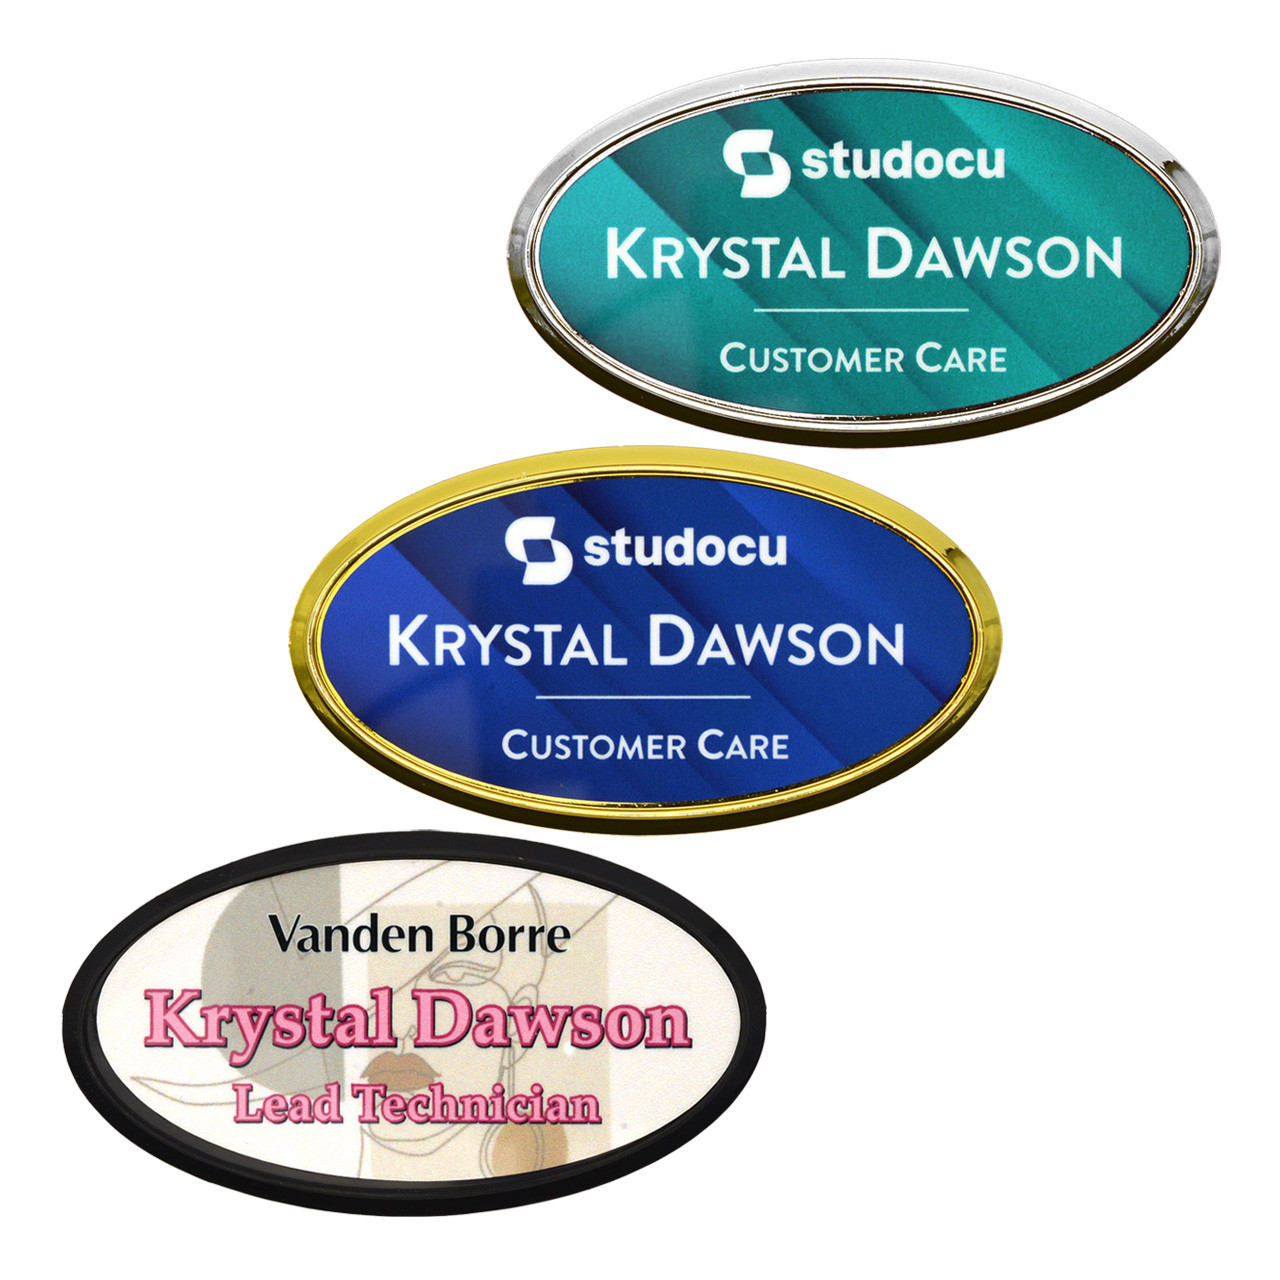 Ultra-Color Metal Name Tags - Trophy Awards Manufacturing